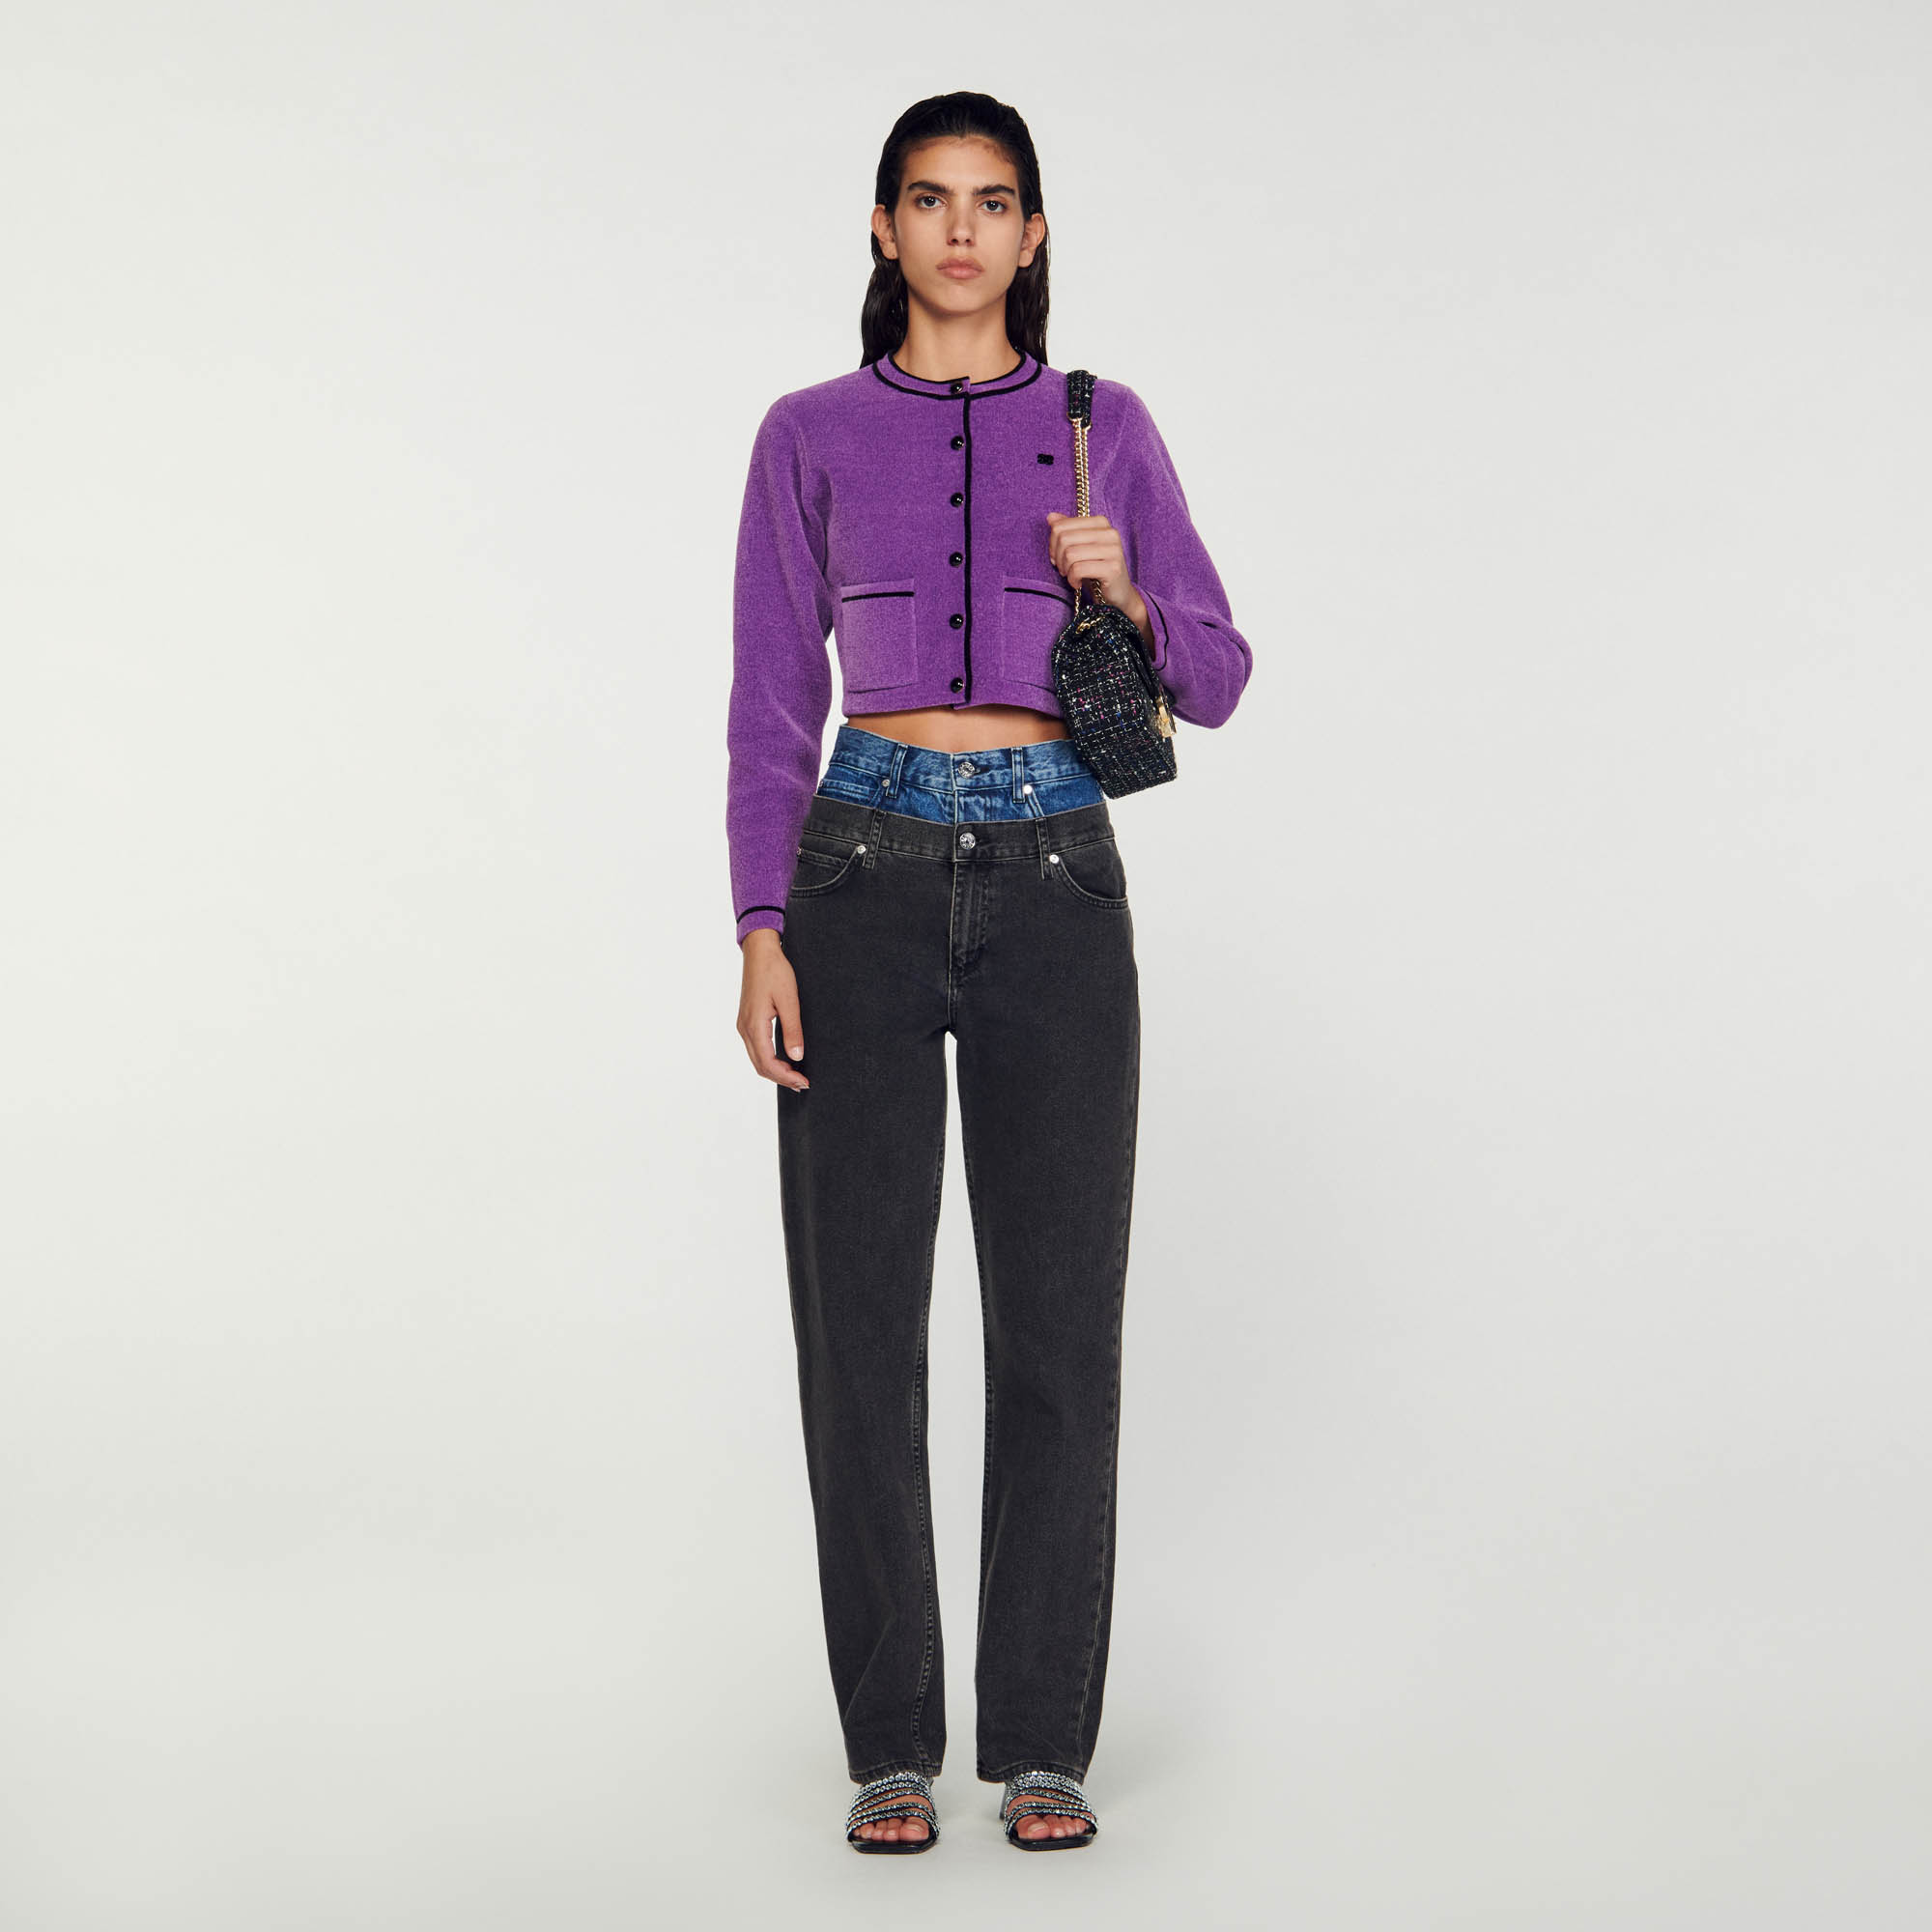 Sandro viscose Velvet-effect short coatigan with round collar, long sleeves, patch pockets and button fastening, embellished with contrasting piping and double-S embroidery on the chest